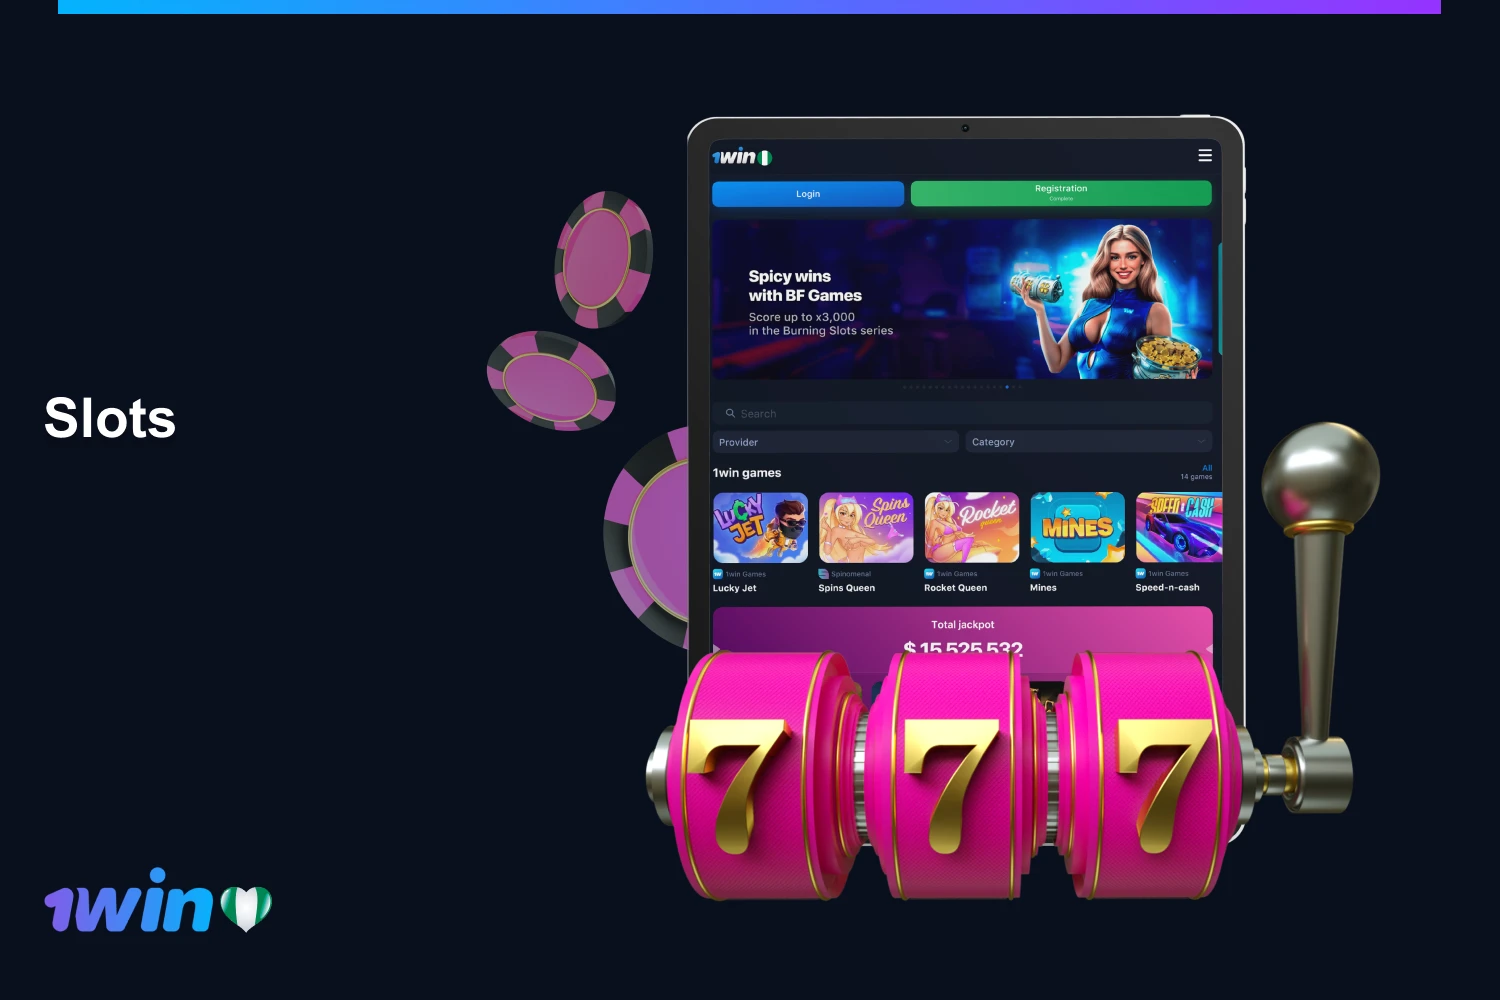 Players from Nigeria have access to 11,000+ slots with different themes, bonus levels and free spins at 1win Casino